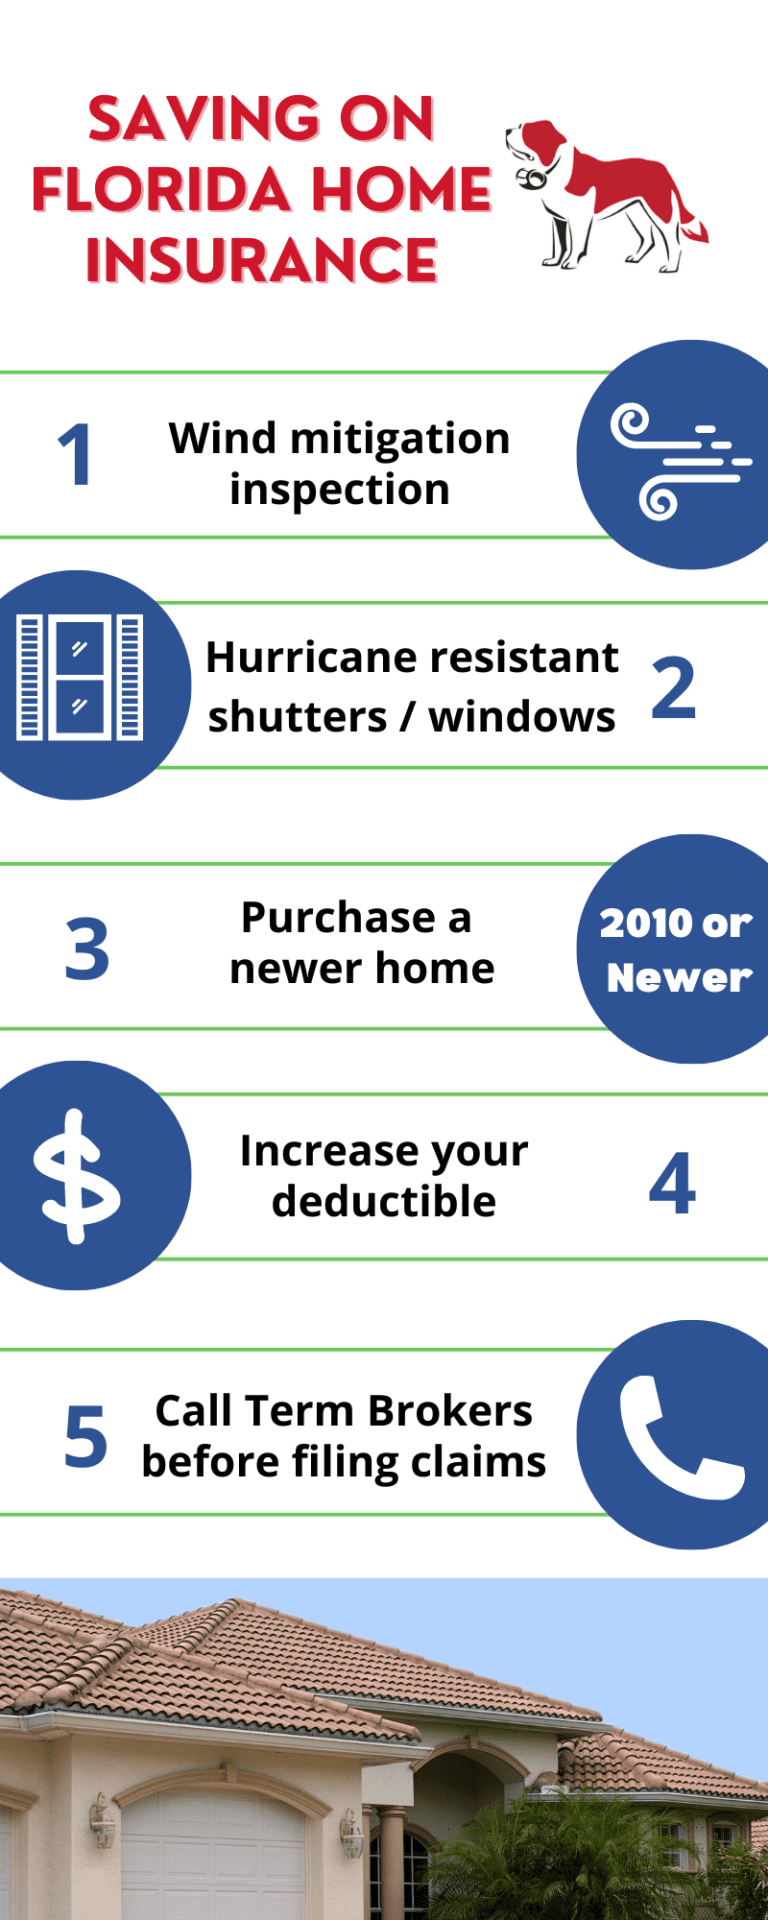 5 Ways To Reduce The Cost of Your Home Insurance